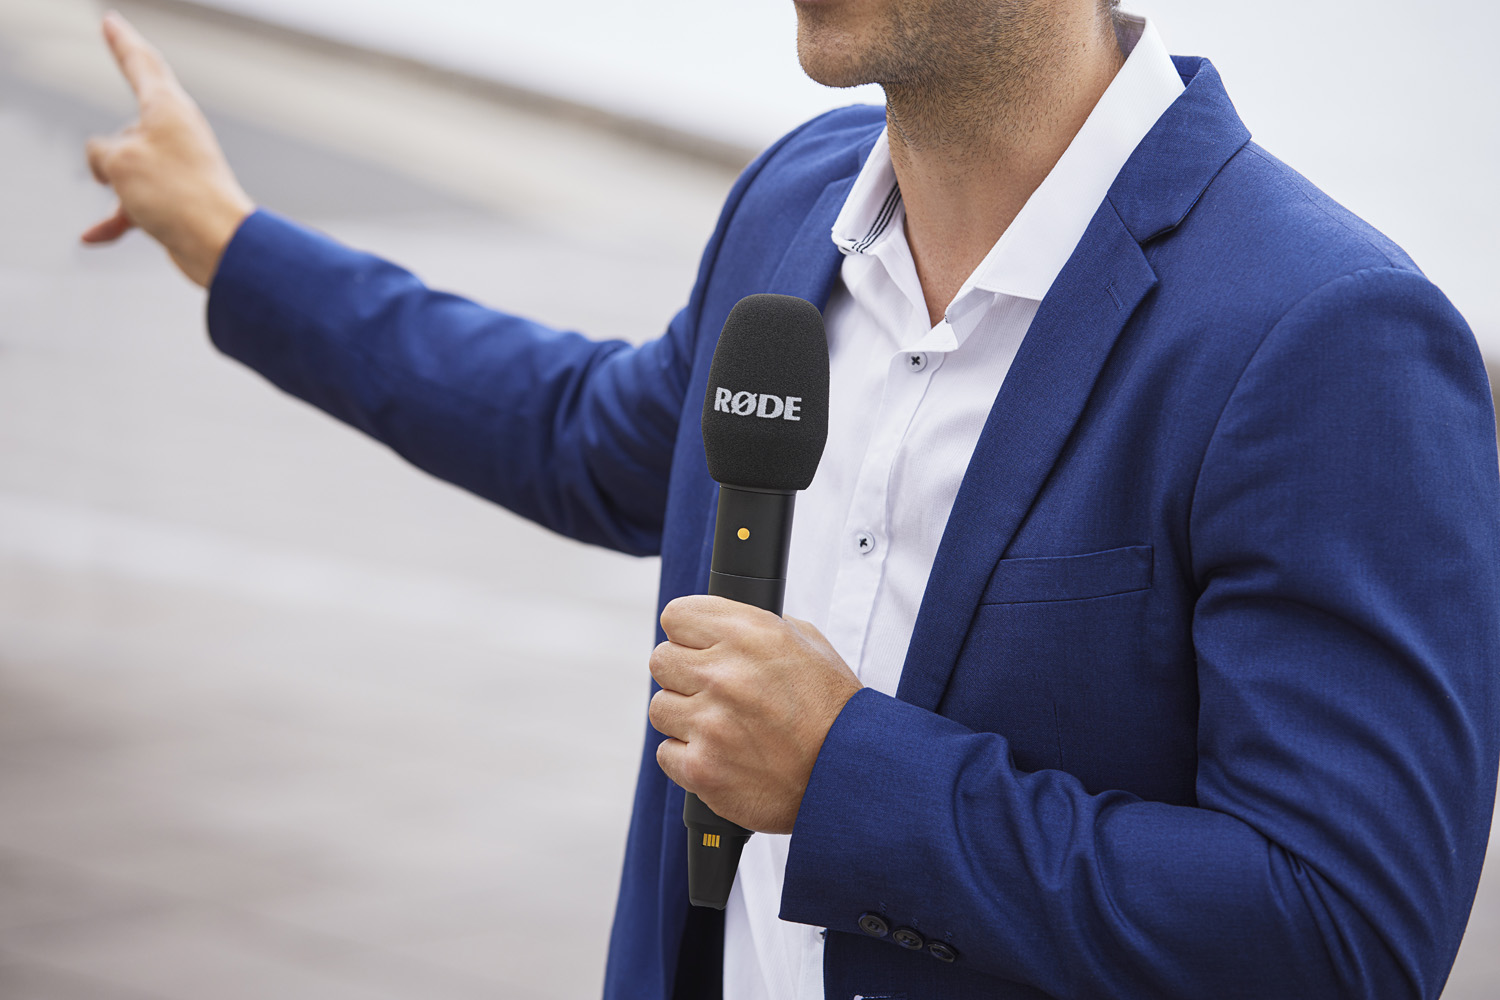 A male reporter in a blue blazer holds a black RØDE Interview PRO wireless handheld microphone. He's pointing with his right hand, directing attention off-camera, likely at an interviewee or subject of interest